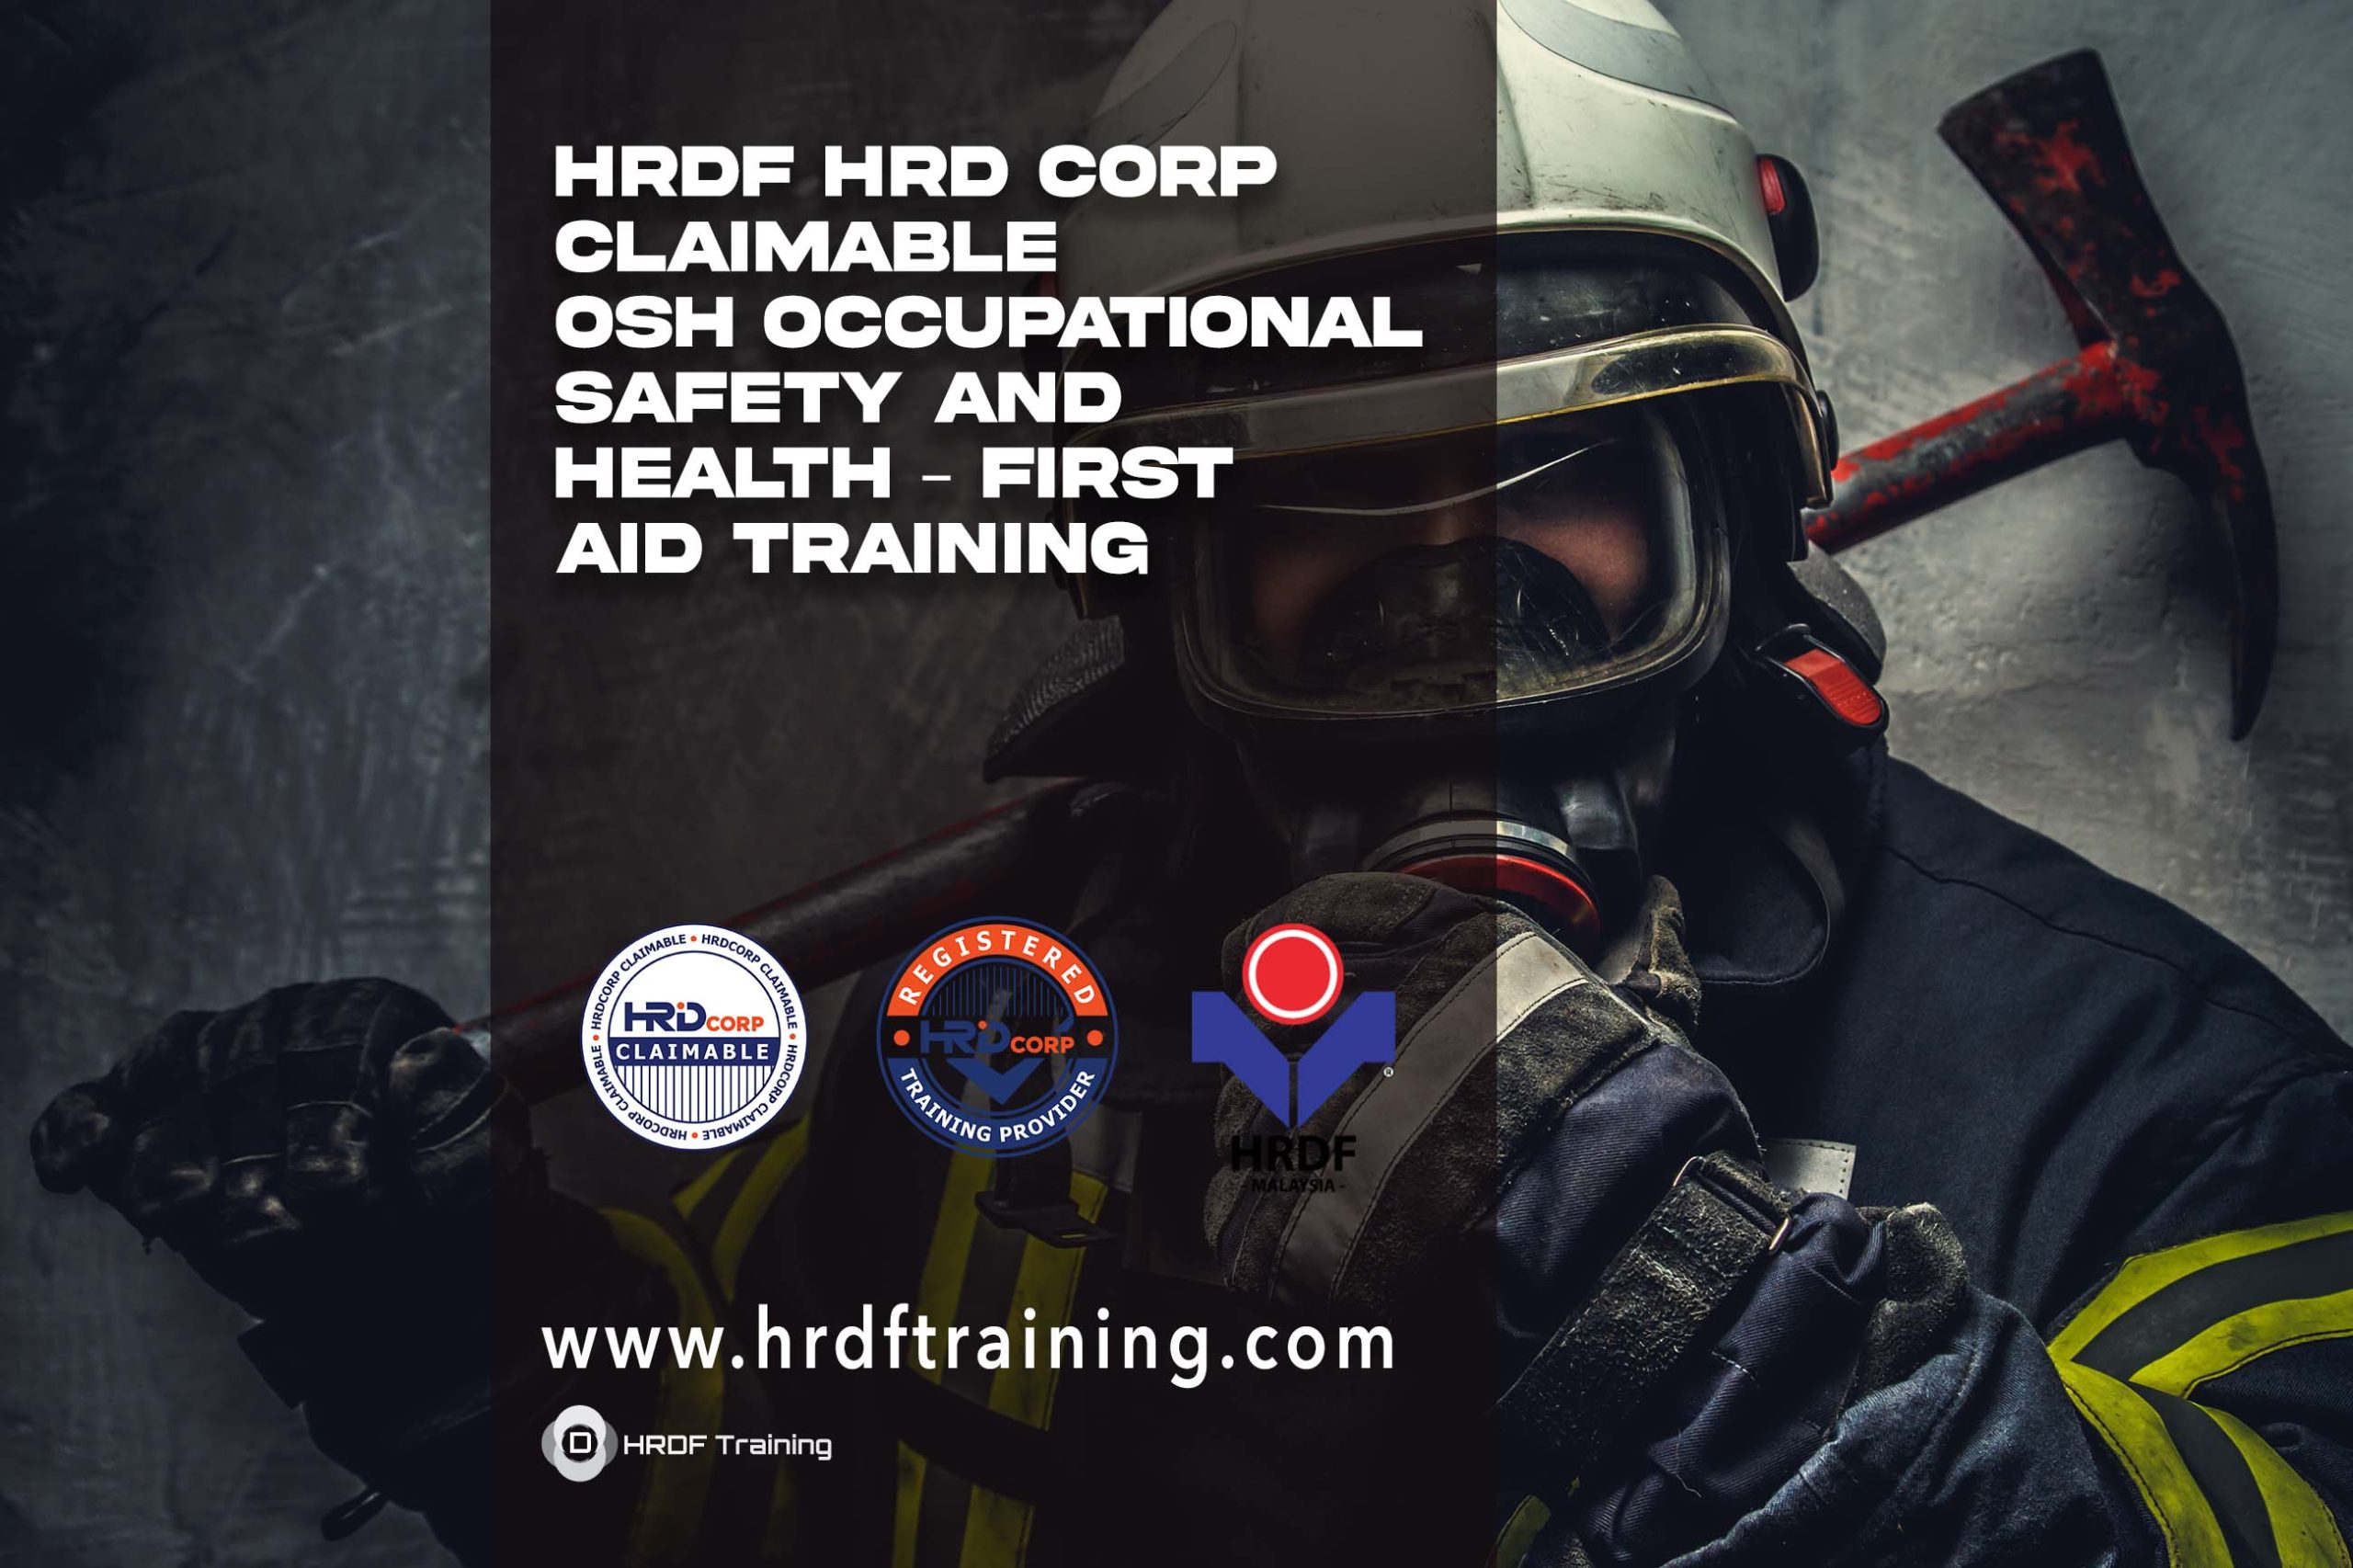 HRDF HRD Corp Claimable OSH Occupational Safety and Health First Aid Training 2023